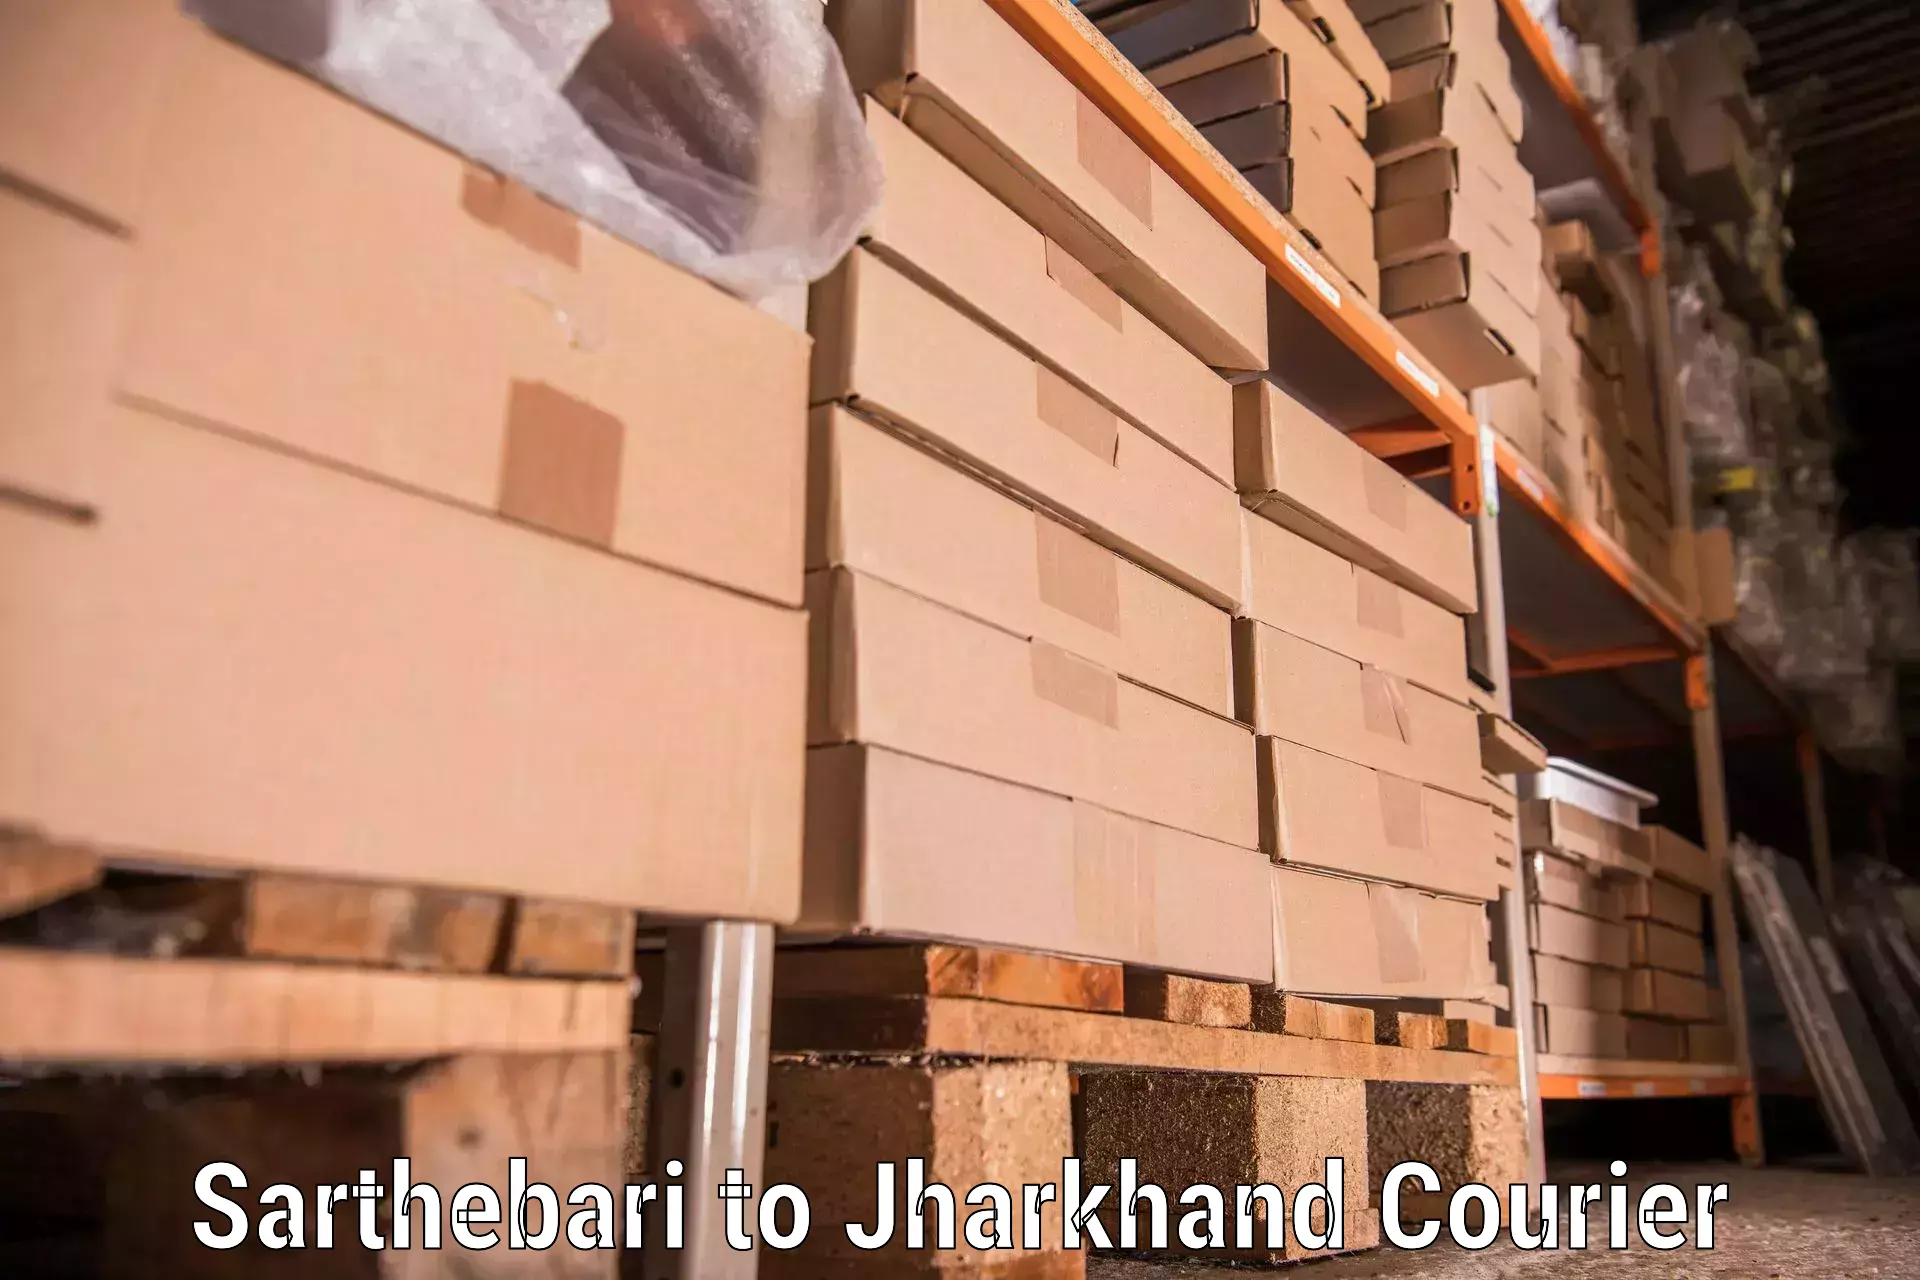 Specialized moving company Sarthebari to Jamshedpur